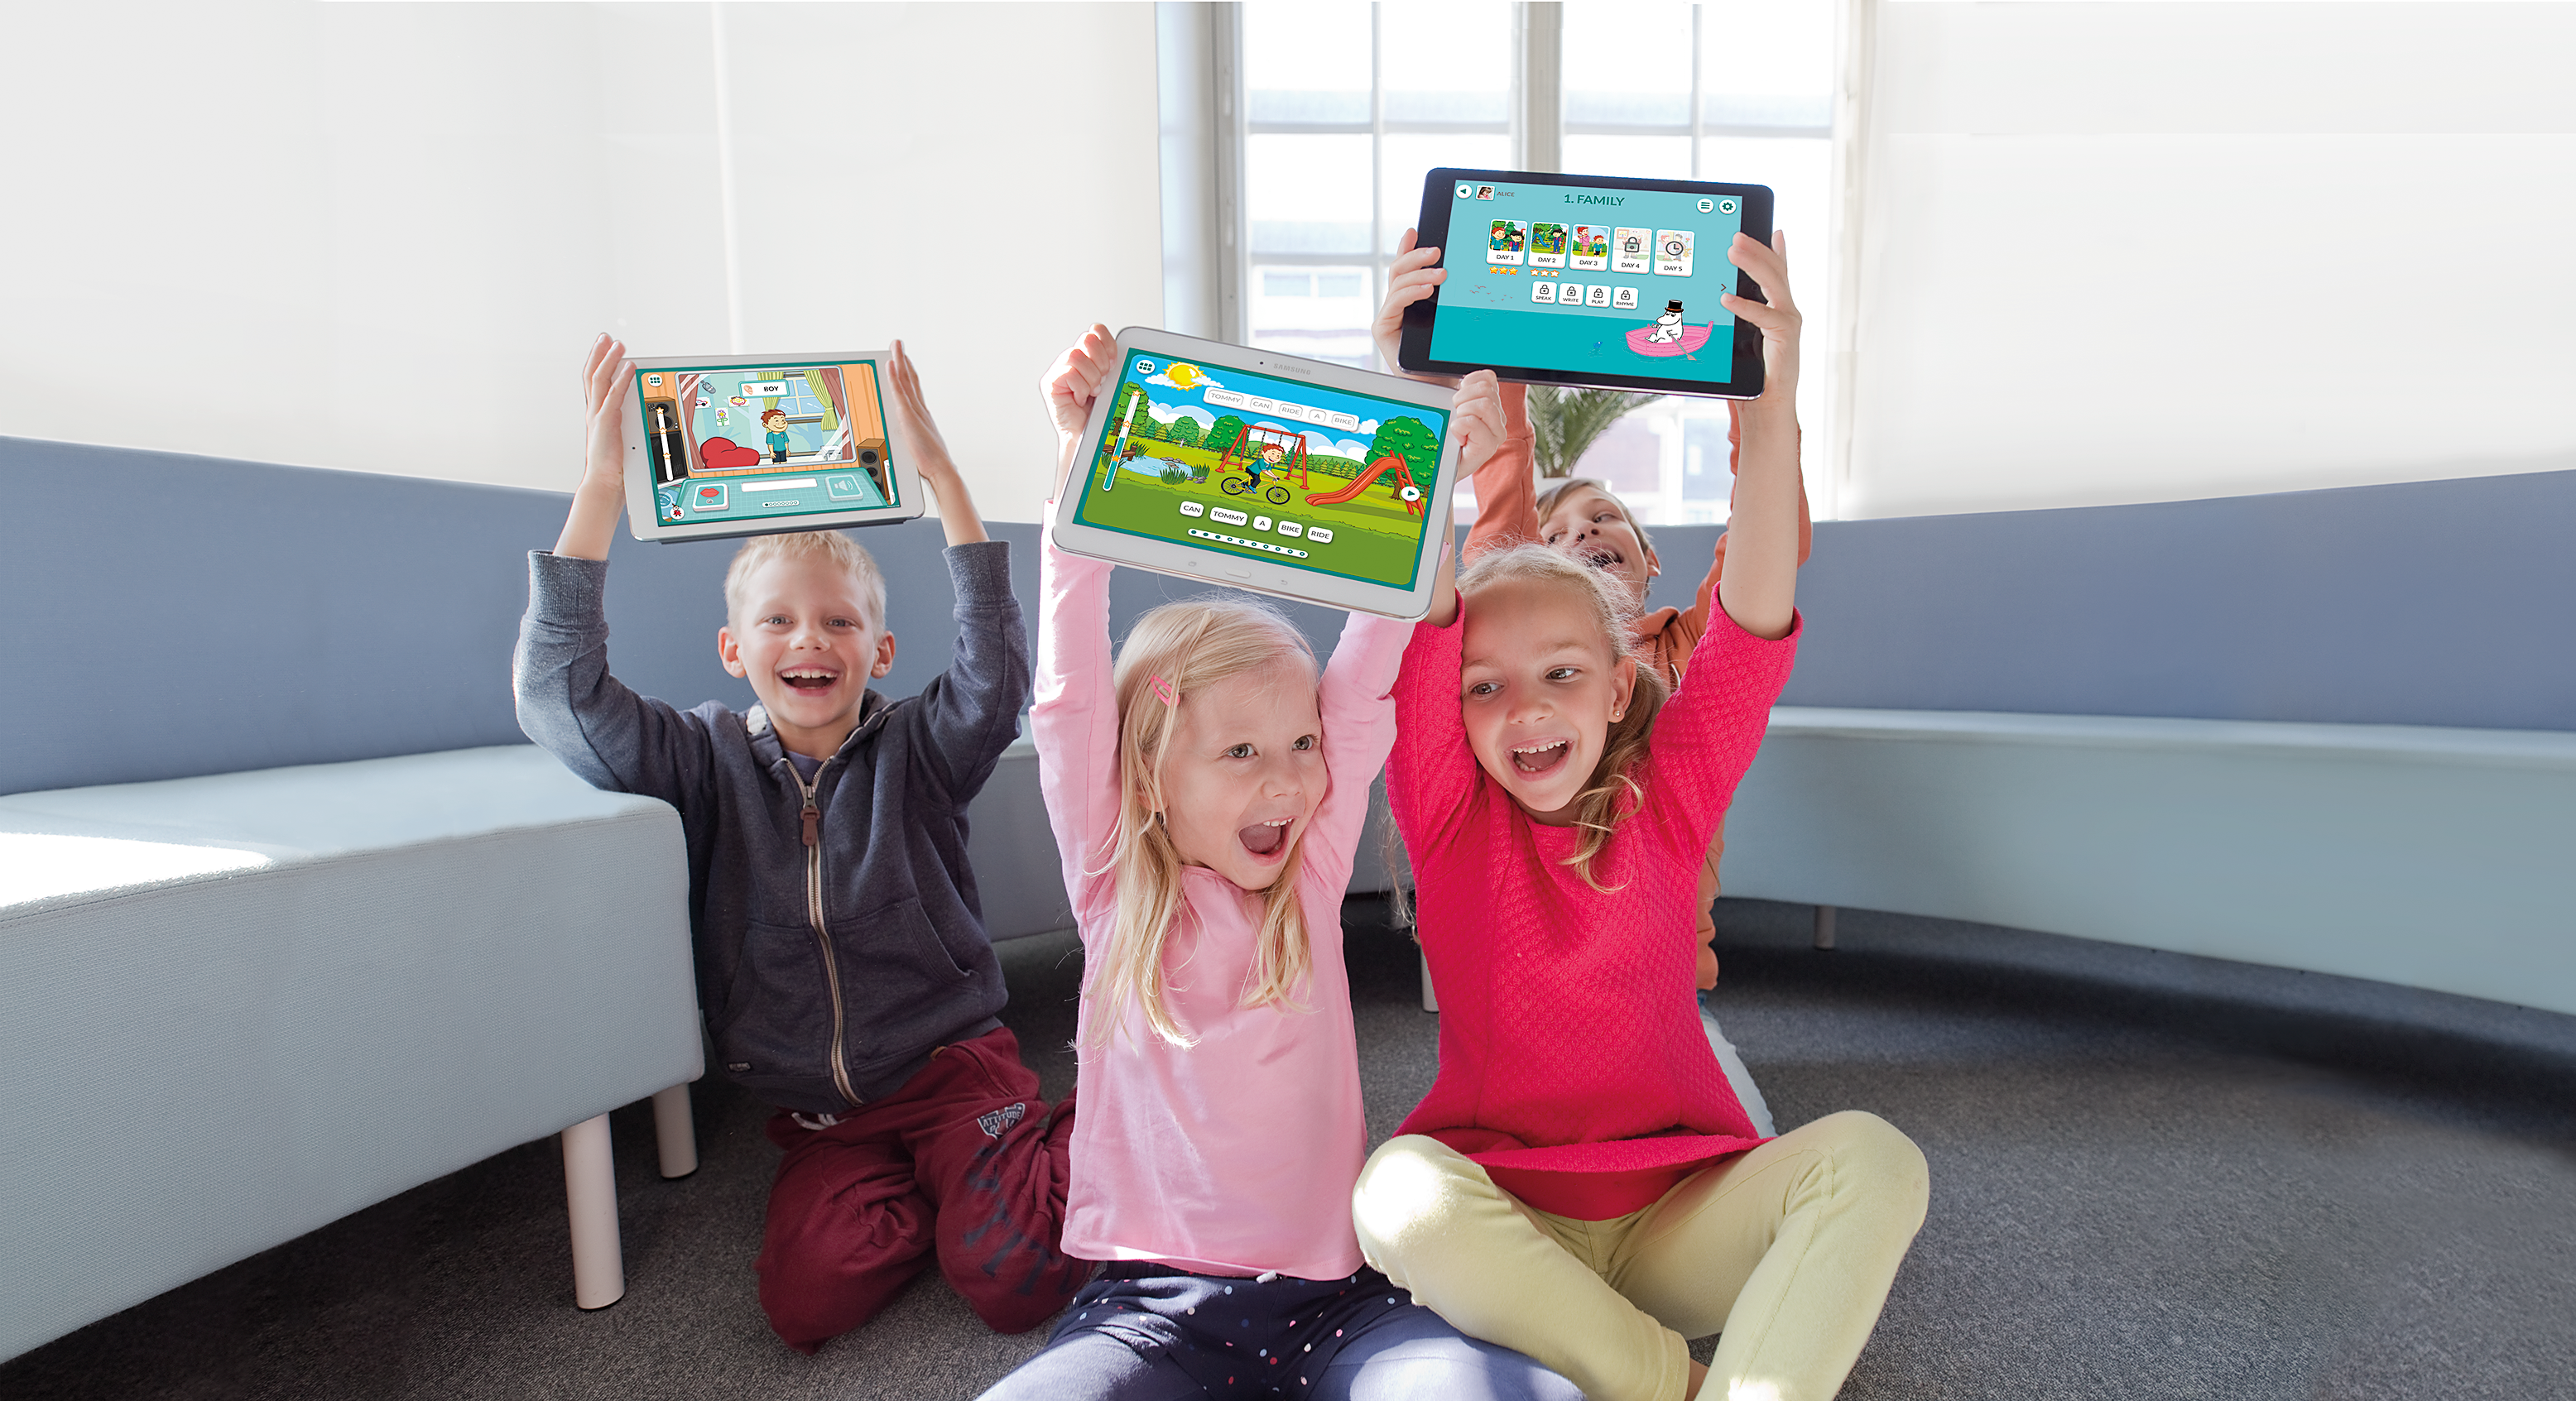 Happy children holding tablets